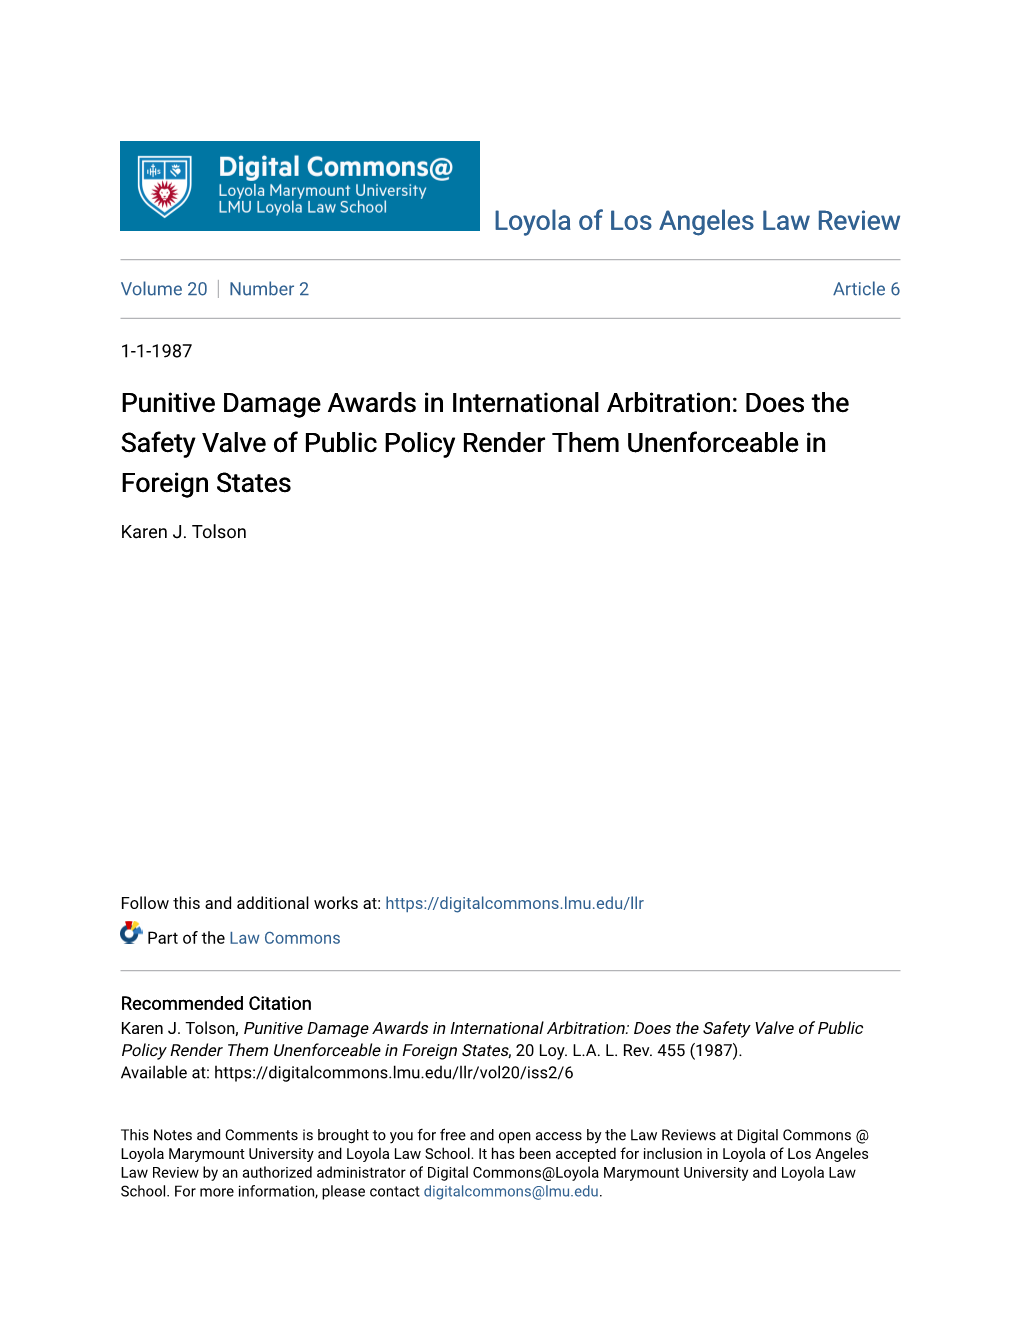 Punitive Damage Awards in International Arbitration: Does the Safety Valve of Public Policy Render Them Unenforceable in Foreign States